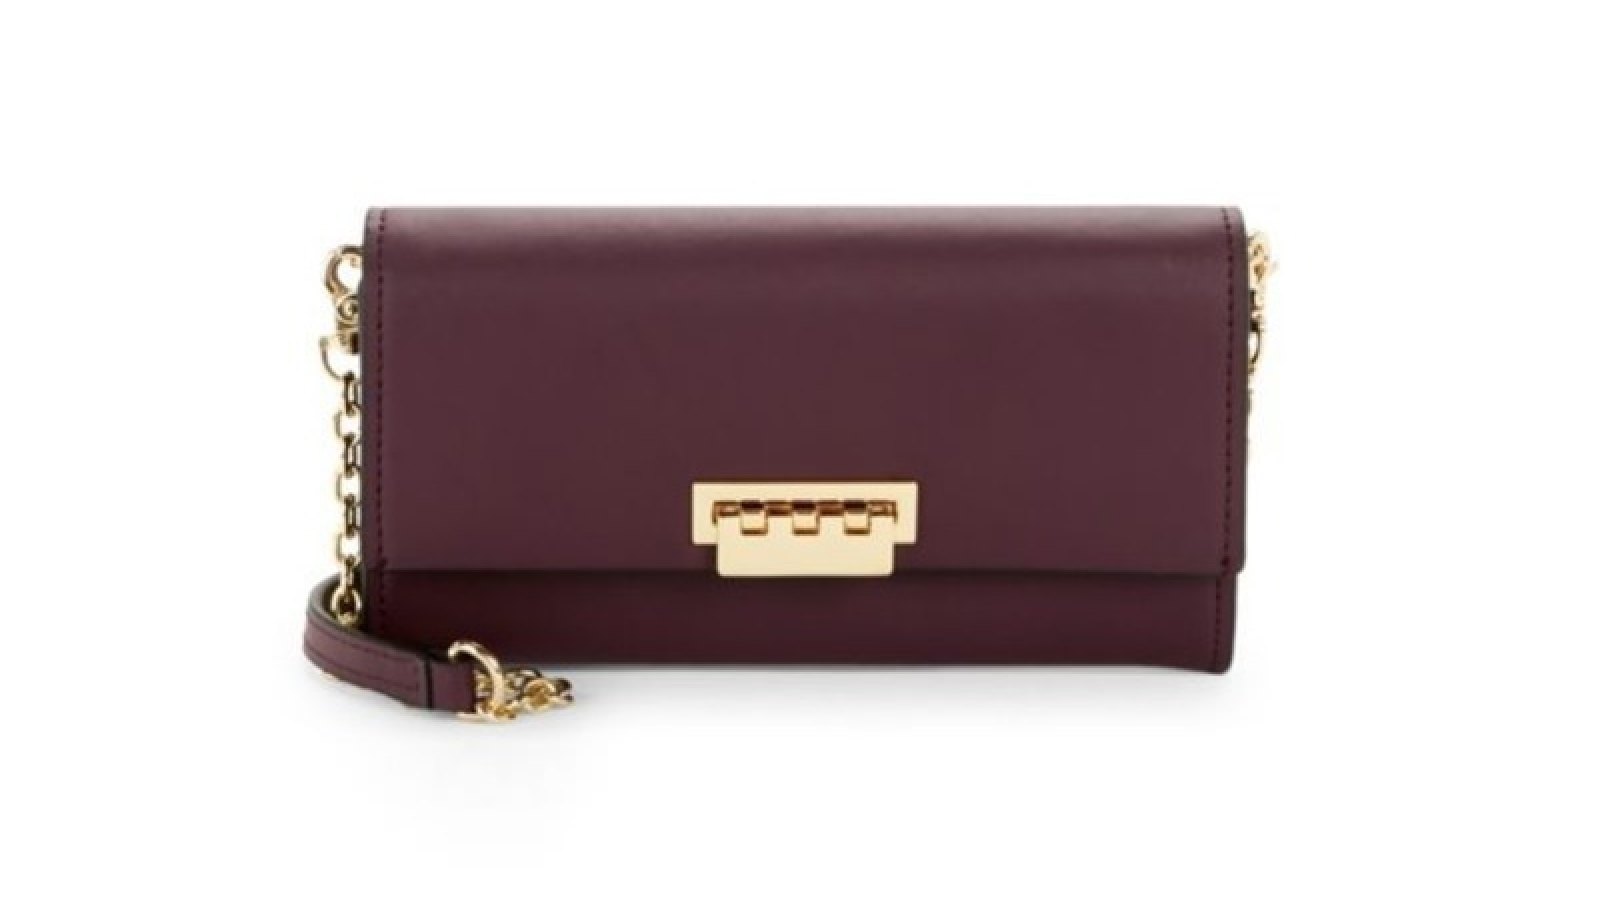 This Zac Posen Purse Is on Sale for Under $50 in 4 Different Colors